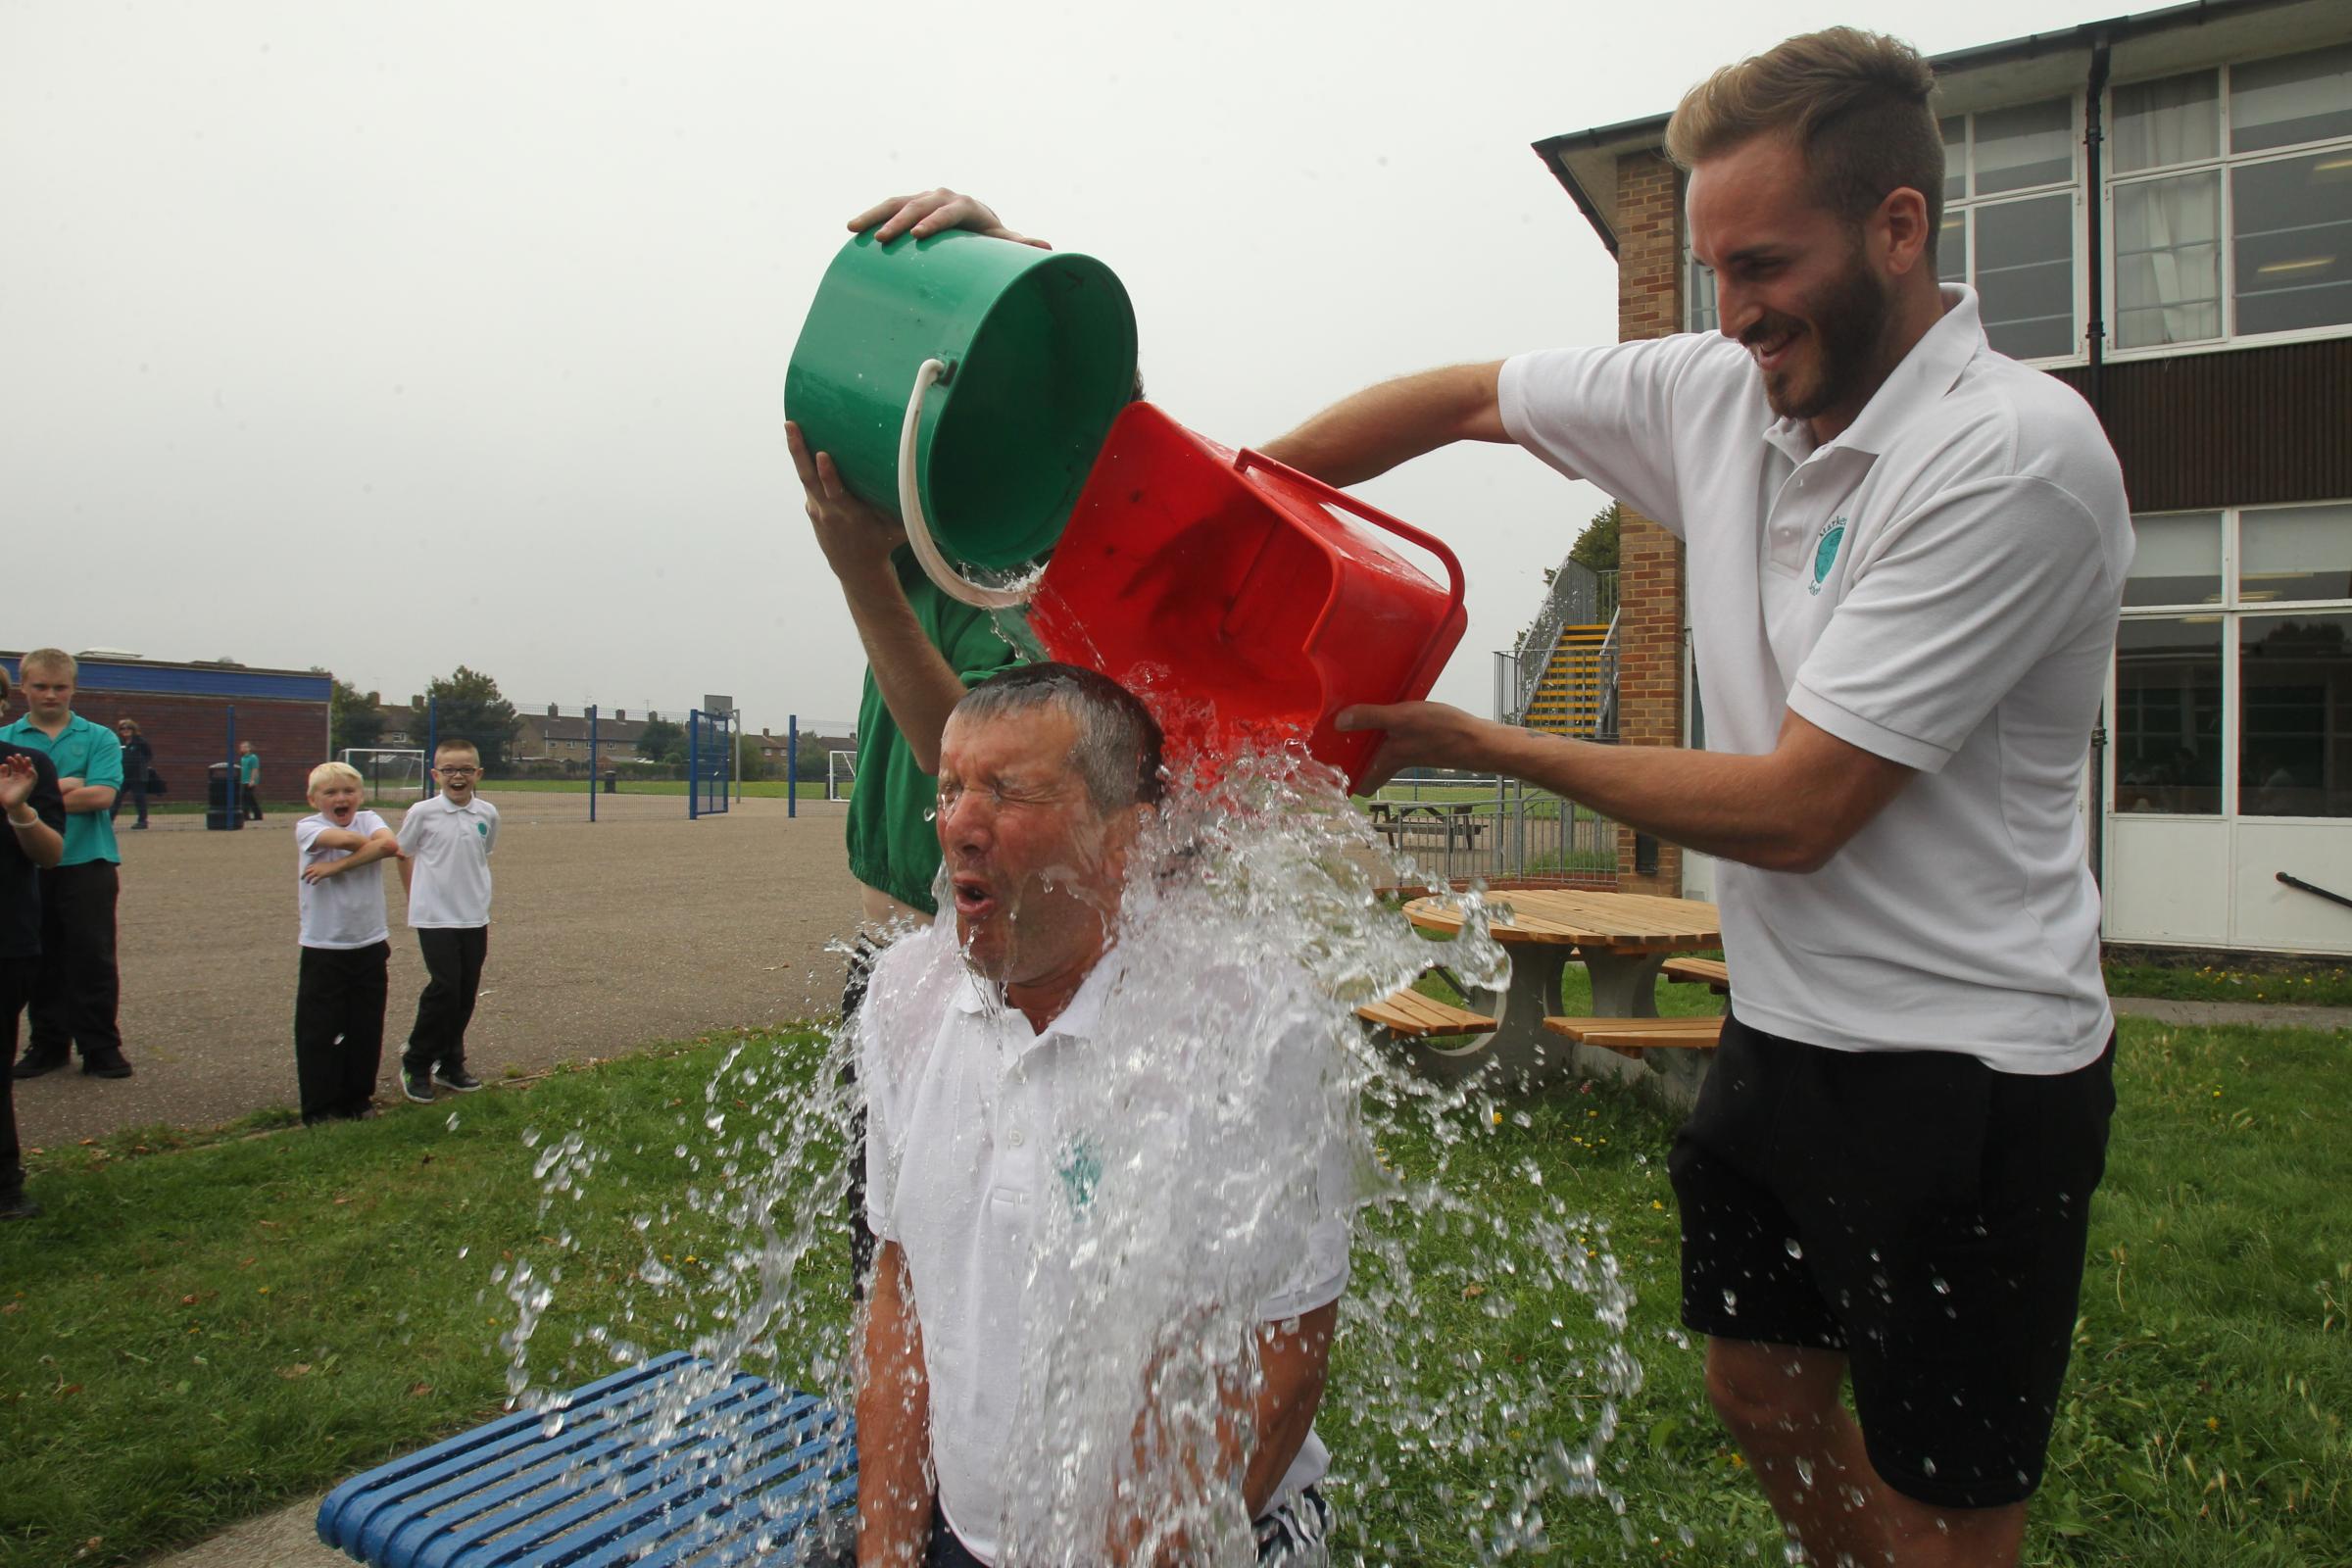 nigel brown Head teacher Gary Smith doing the ice bucket challenge with the children throwing the water over him, on Friday at Market Field School at the former Alderman Blaxill Site, Paxman Avenue Colchester.Also pictured pouring the water are,